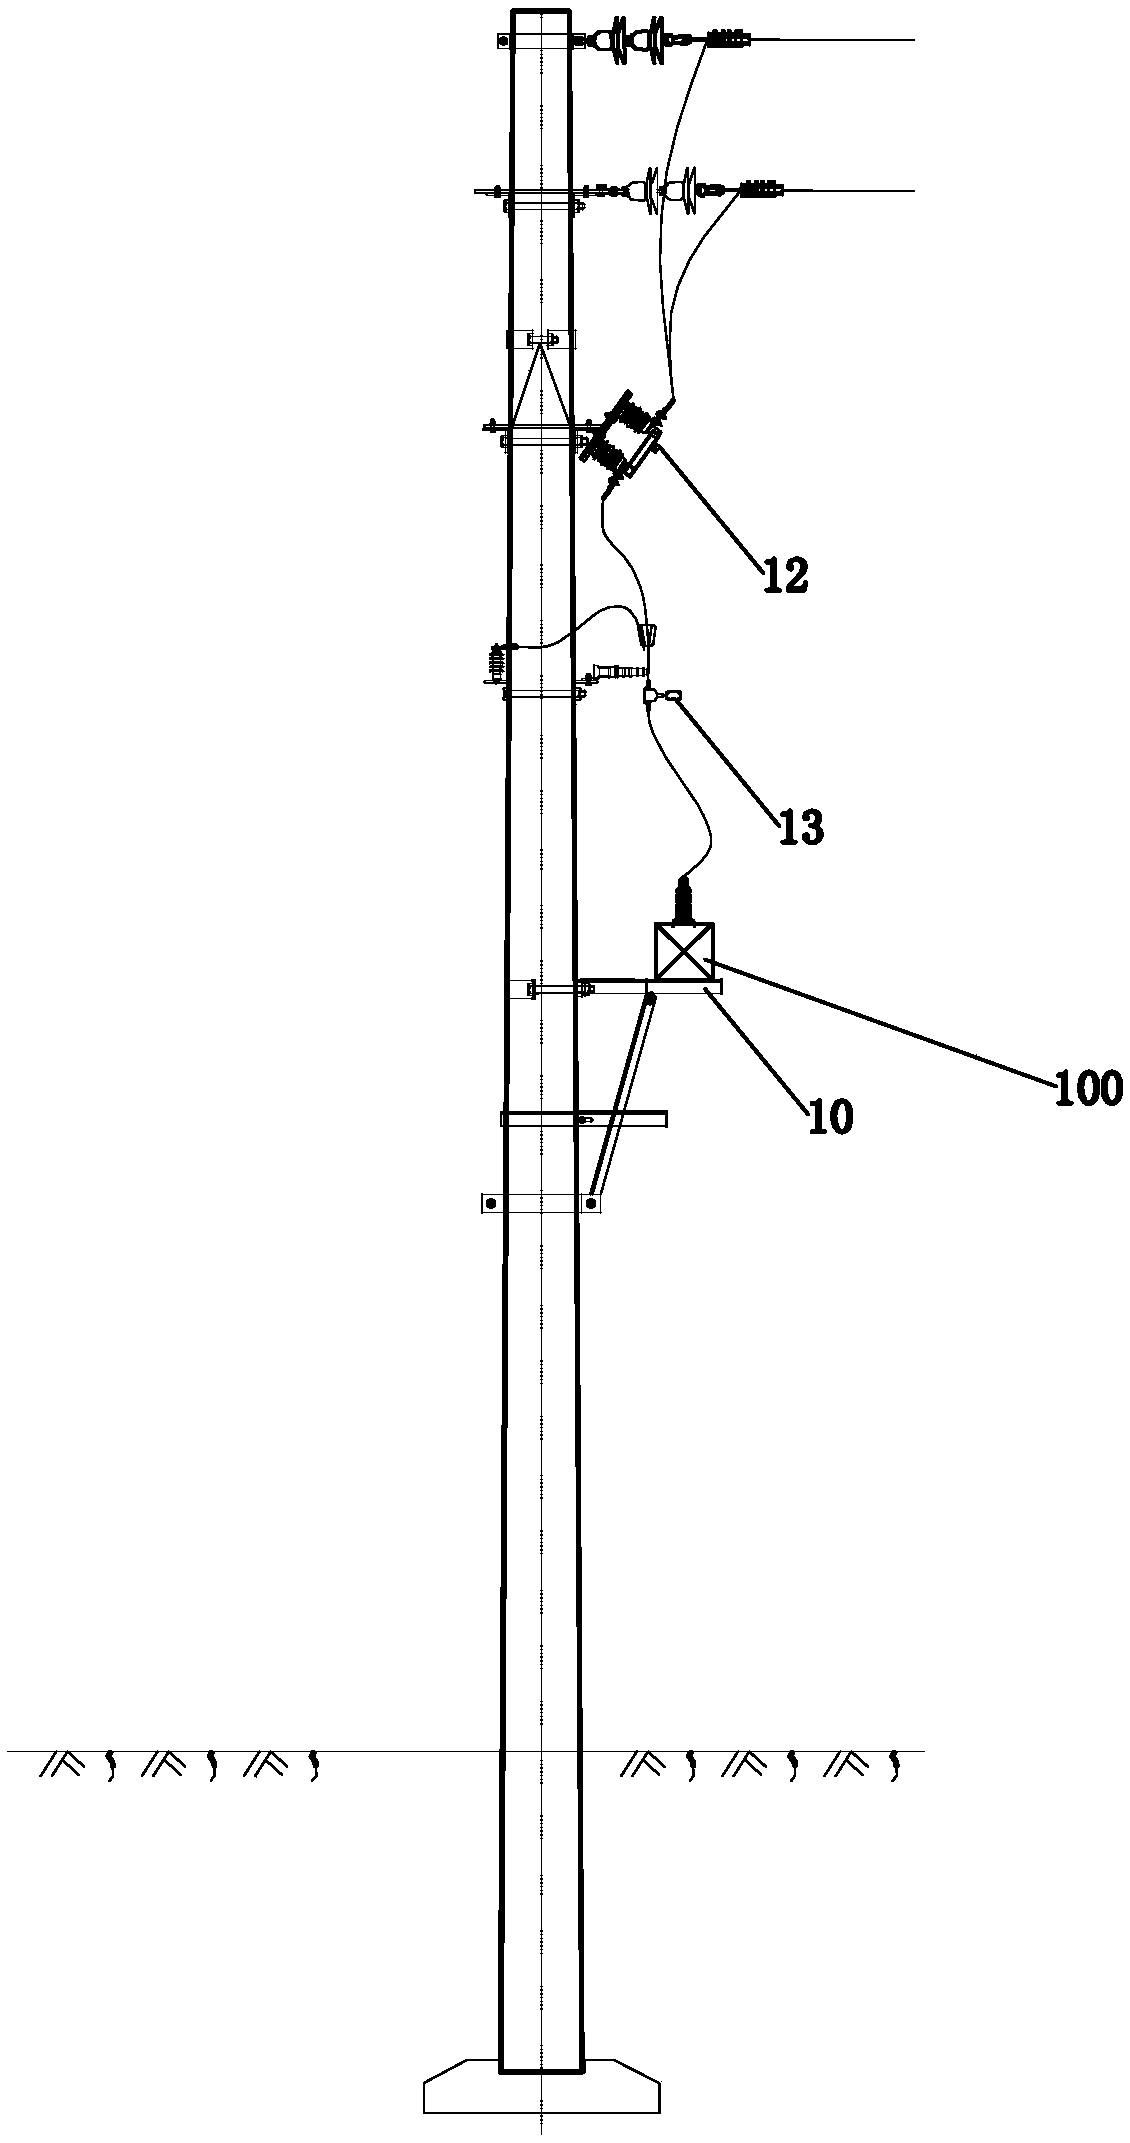 Rapid power supply connection device for 10KV overhead power distribution line